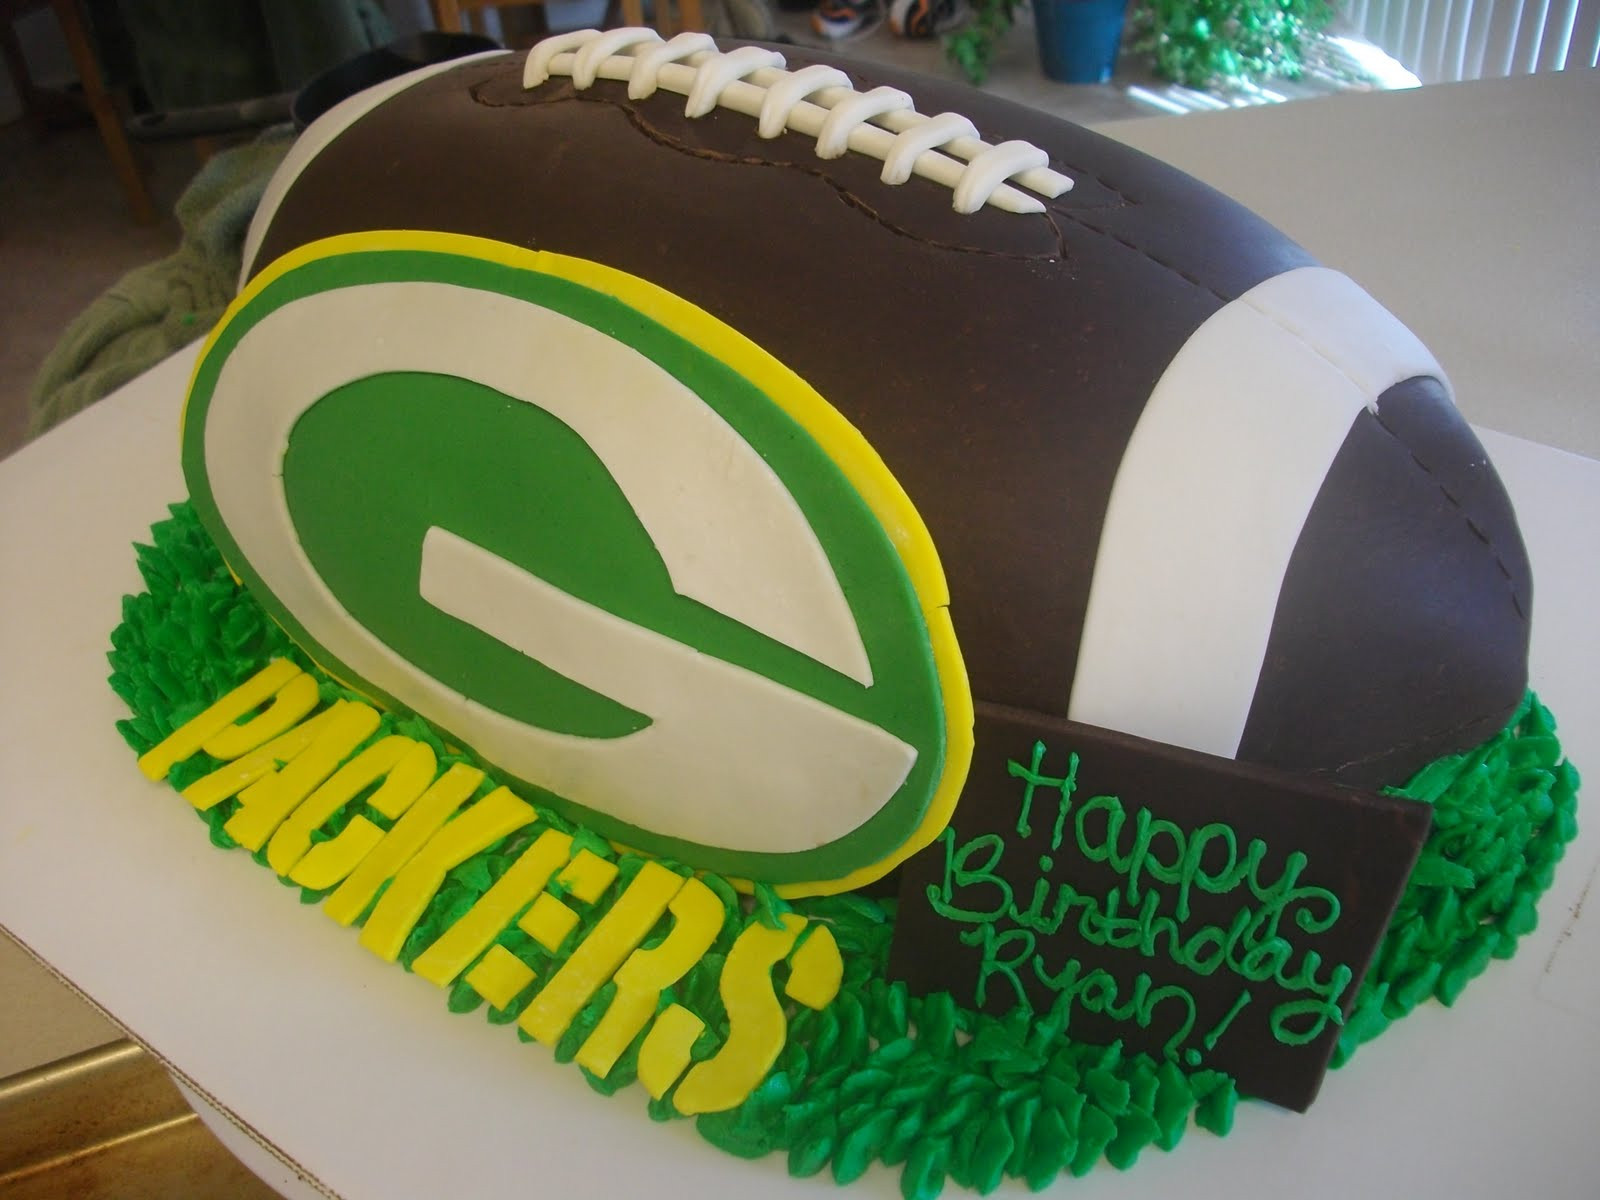 Green Bay Packers Birthday Cake
 Aubrys Cakes Green Bay Packers Birthday Cake